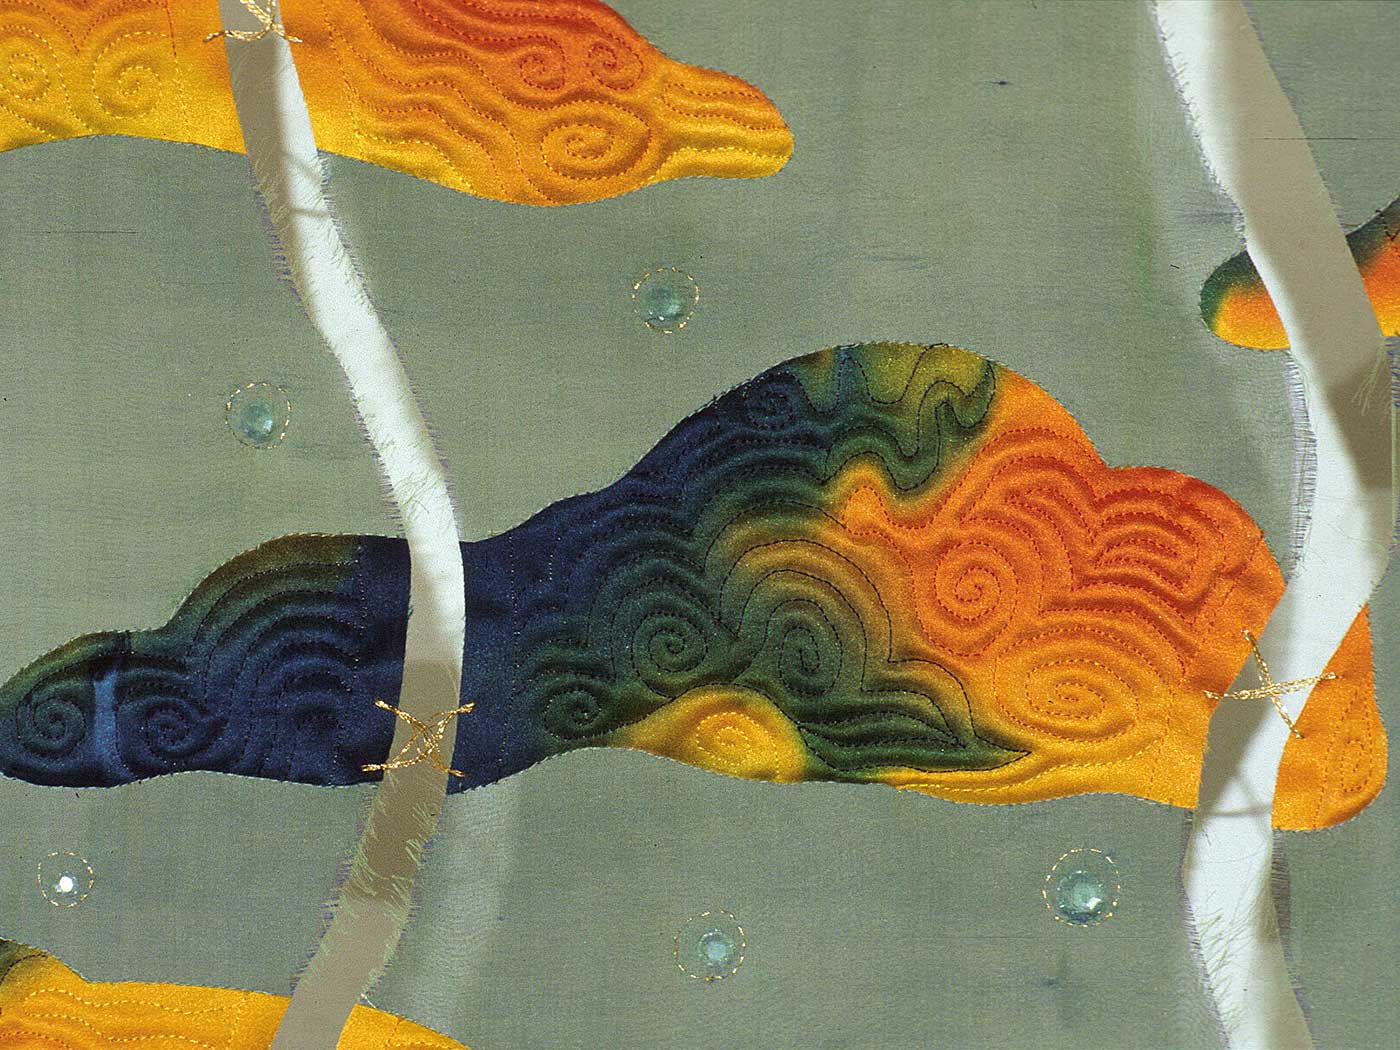 Detail image of Dreaming the Sunset Date ©2003 Linda Gass